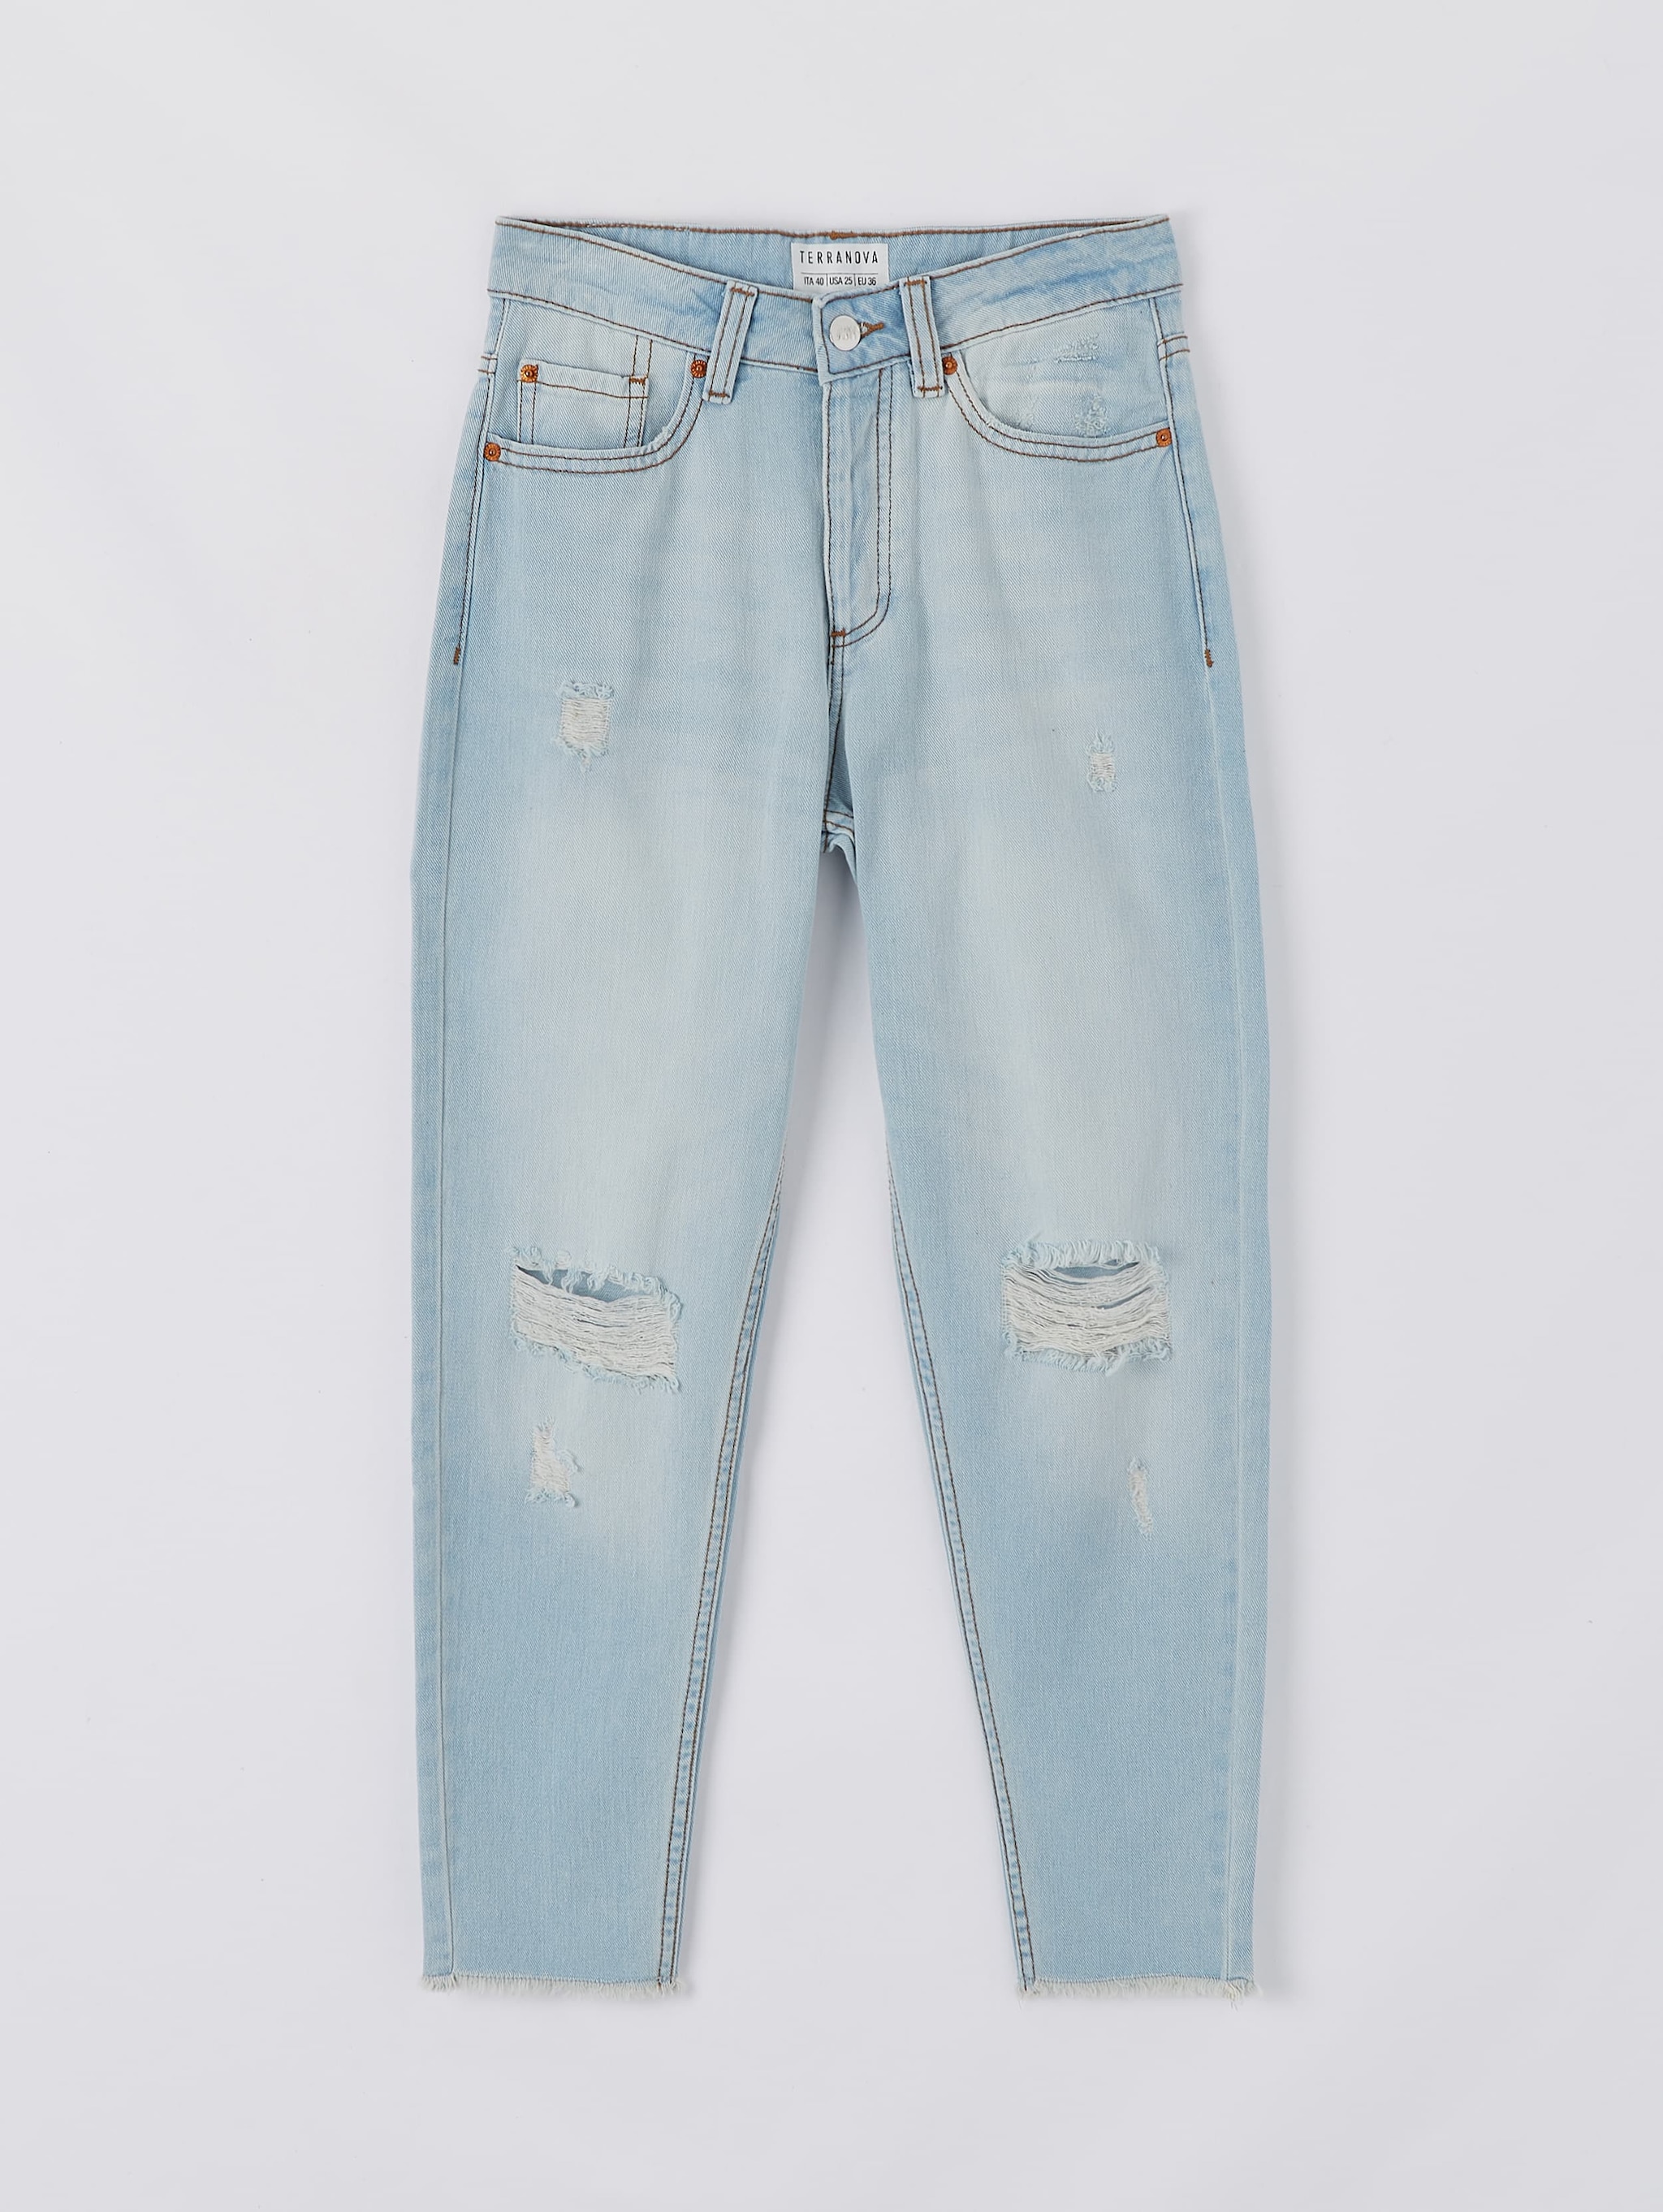 ripped light blue mom jeans